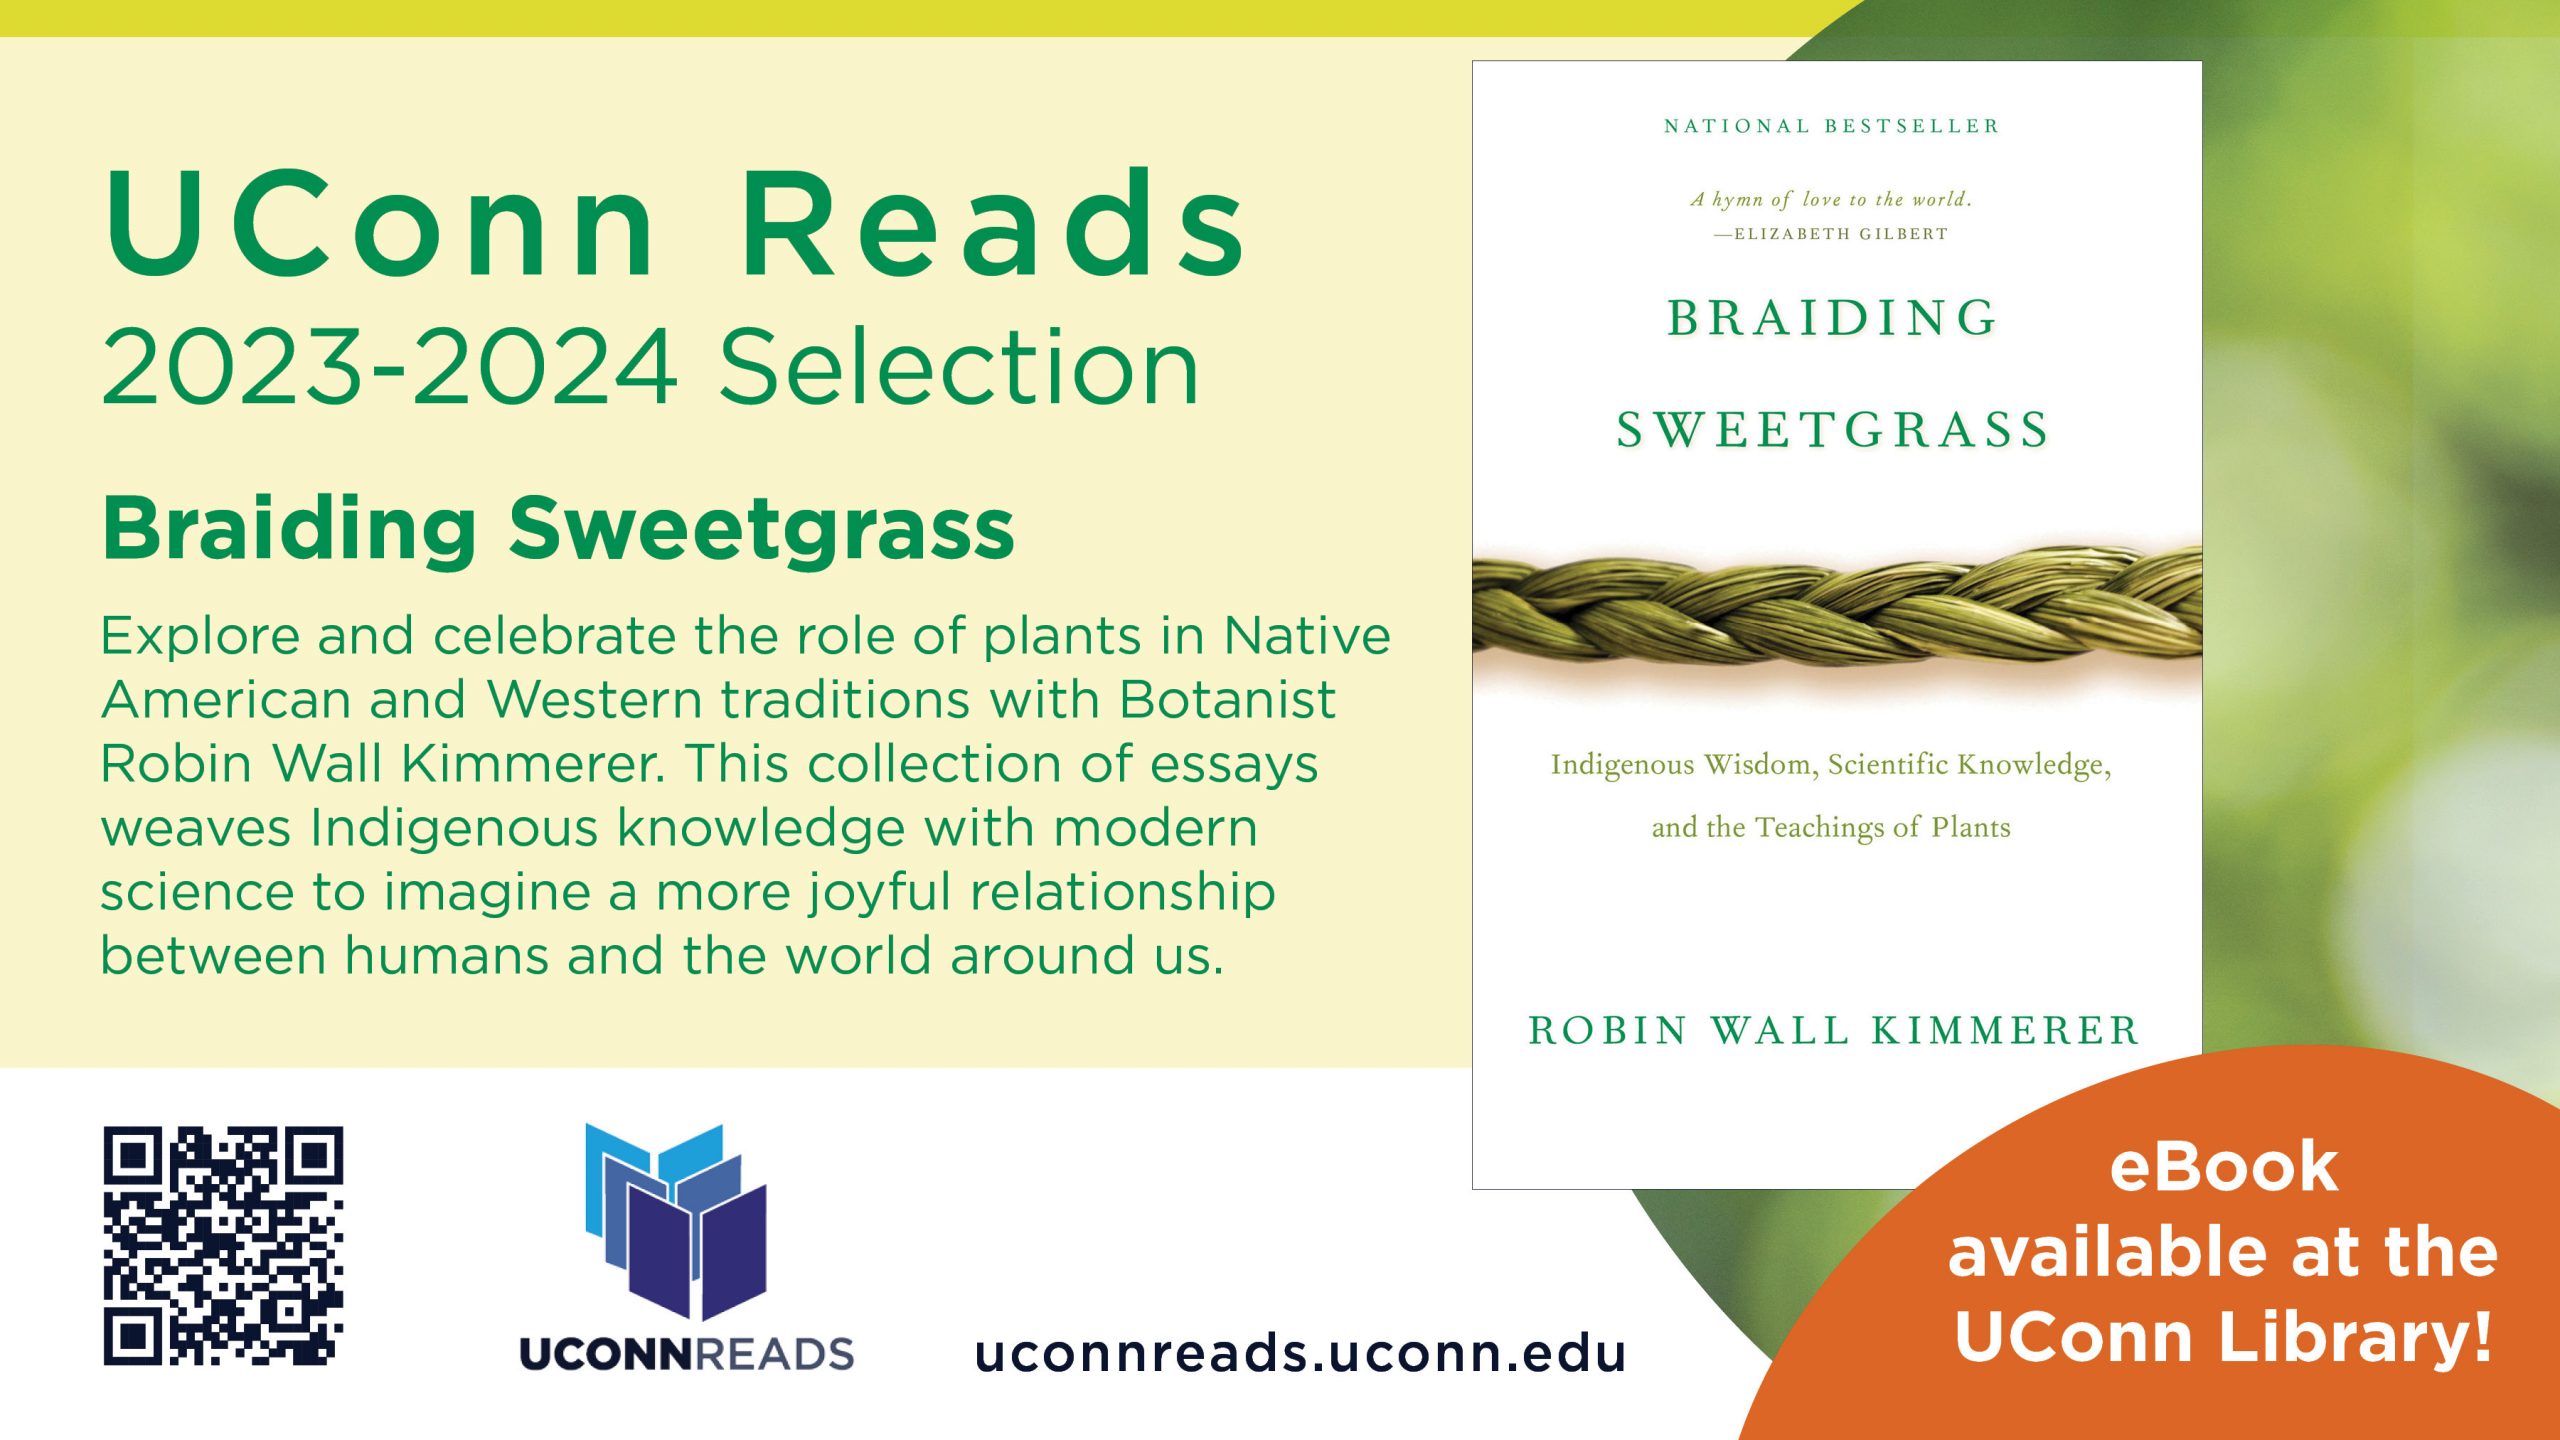 Braiding Sweetgrass book cover to announce the 2023-2024 UConn Reads selection. Braiding Sweetgrass - Explore and celebrate the role of plants in Native American and Western traditions with Botanist Robin Wall Kimmerer. This collection of essays weaves Indigenous knowledge with modern science to imagine a more joyful relationship between humans and the world around us. eBook is available at UConn Library and at uconnreads.uconn.edu